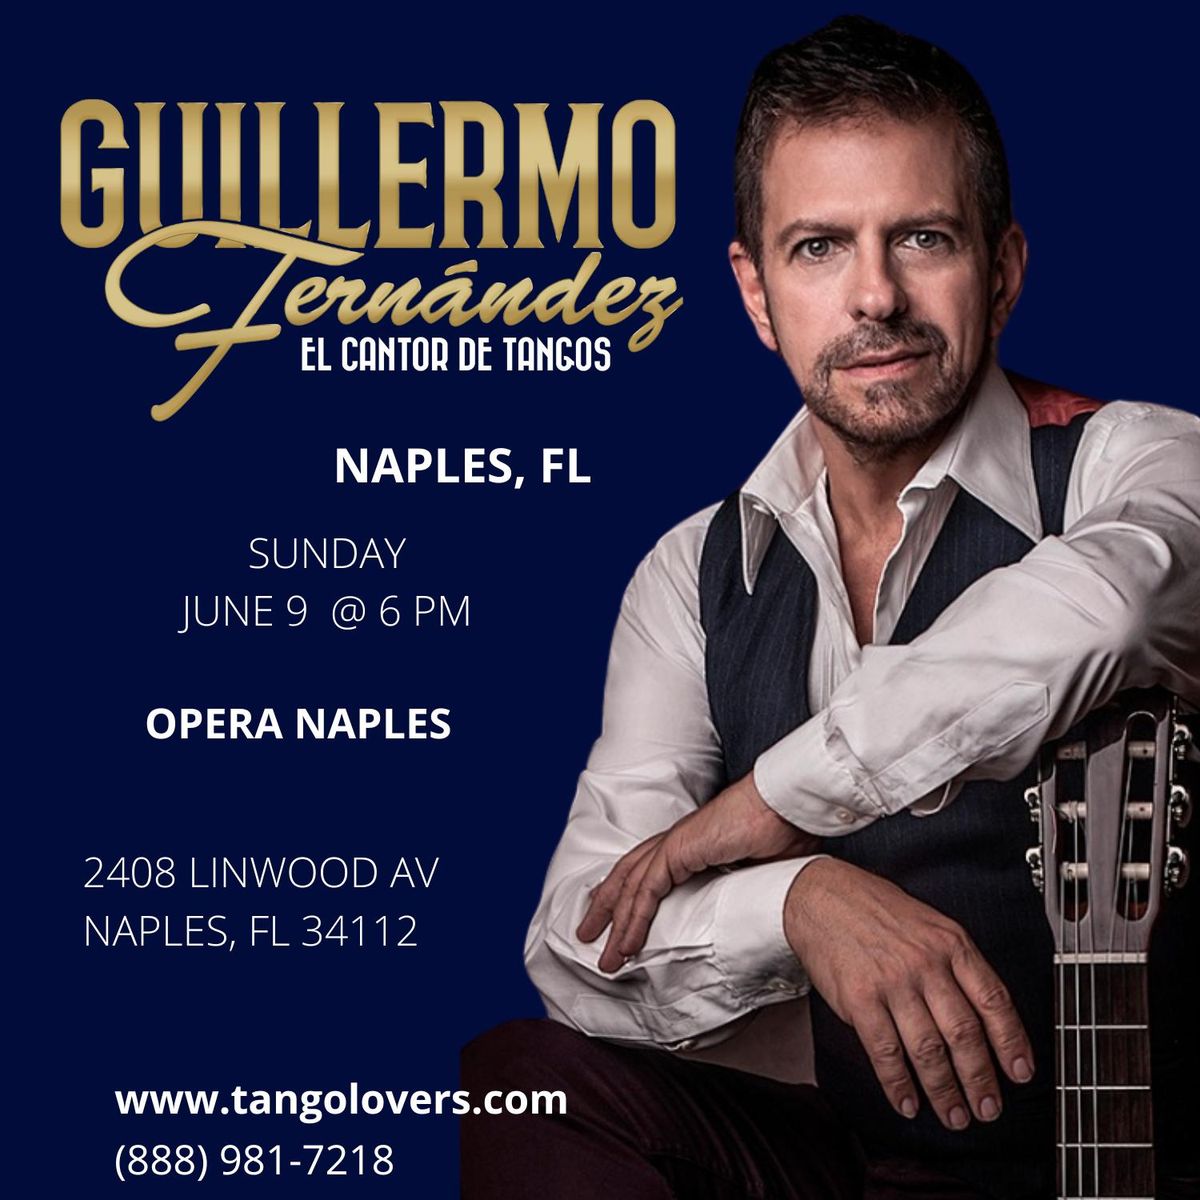 The TANGO and its stories by acclaimed Argentine singer GUILLERMO FERNANDEZ in Naples, FL